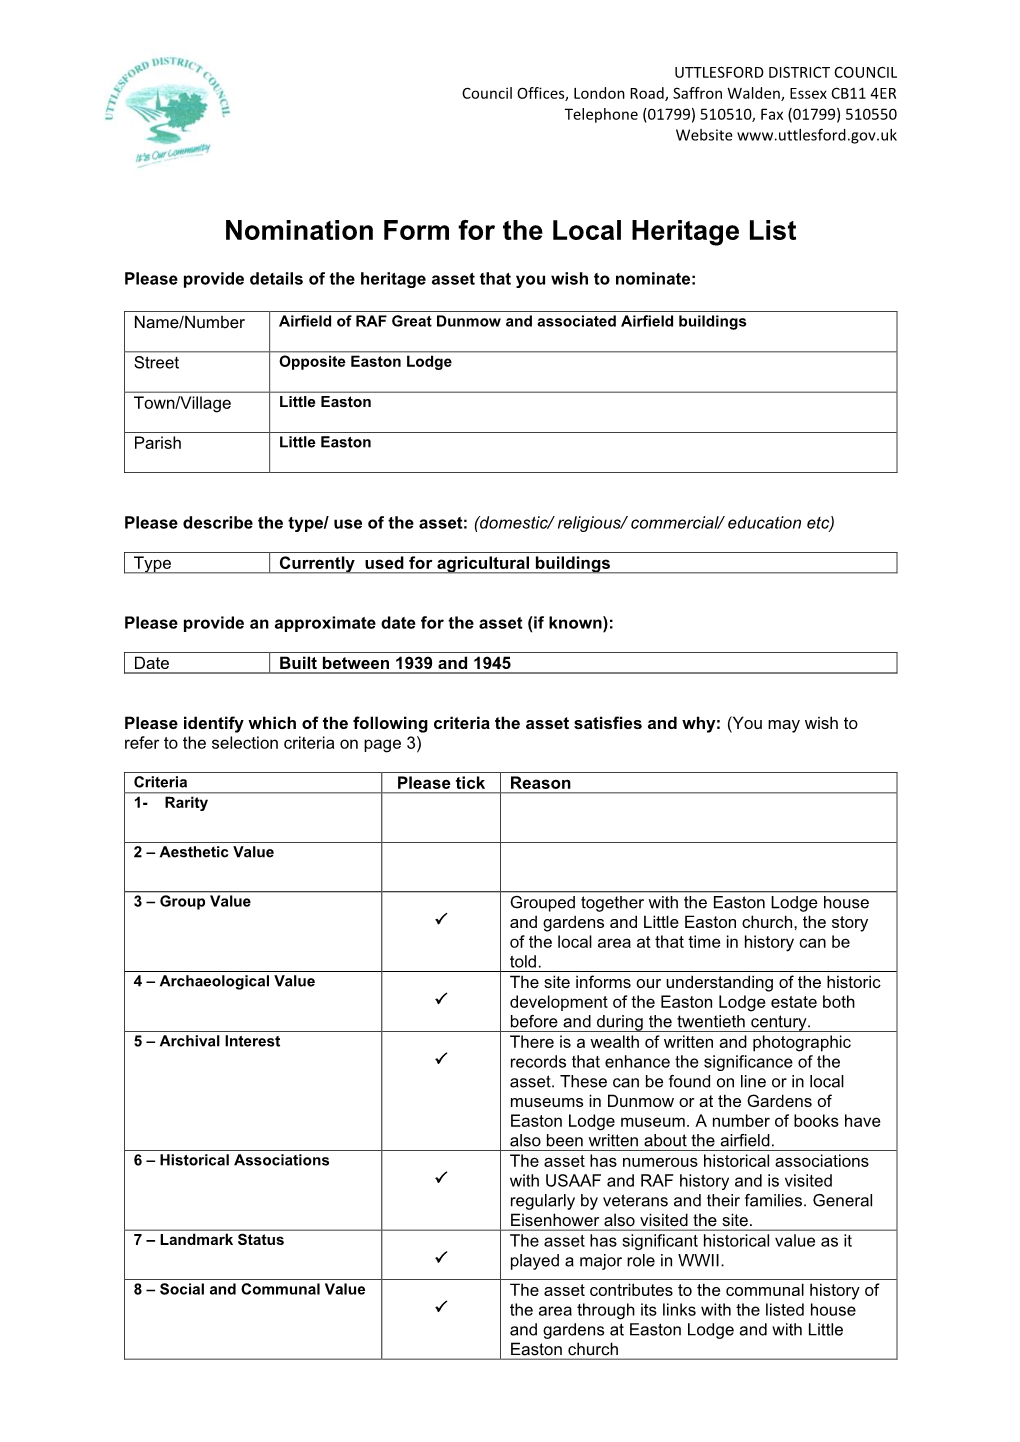 Nomination Form for the Local Heritage List